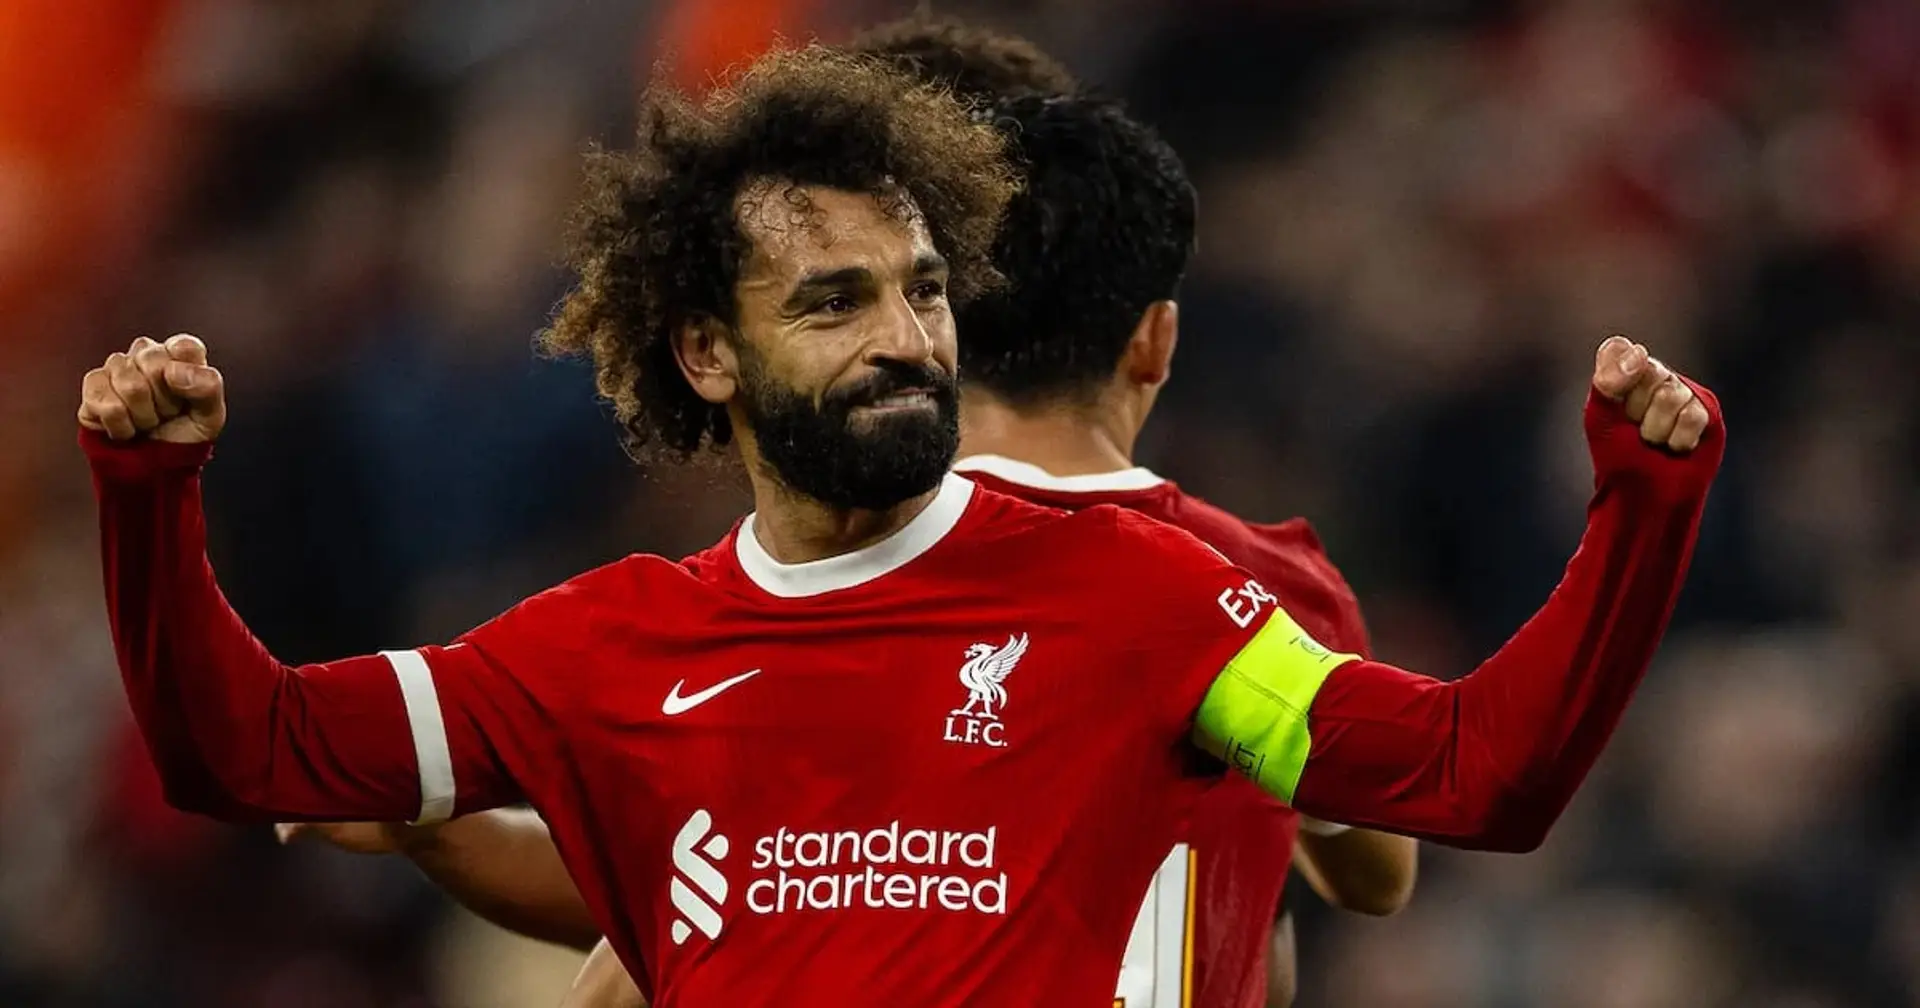 Liverpool 4-0 LASK: LIVE updates, reactions, stats, ratings